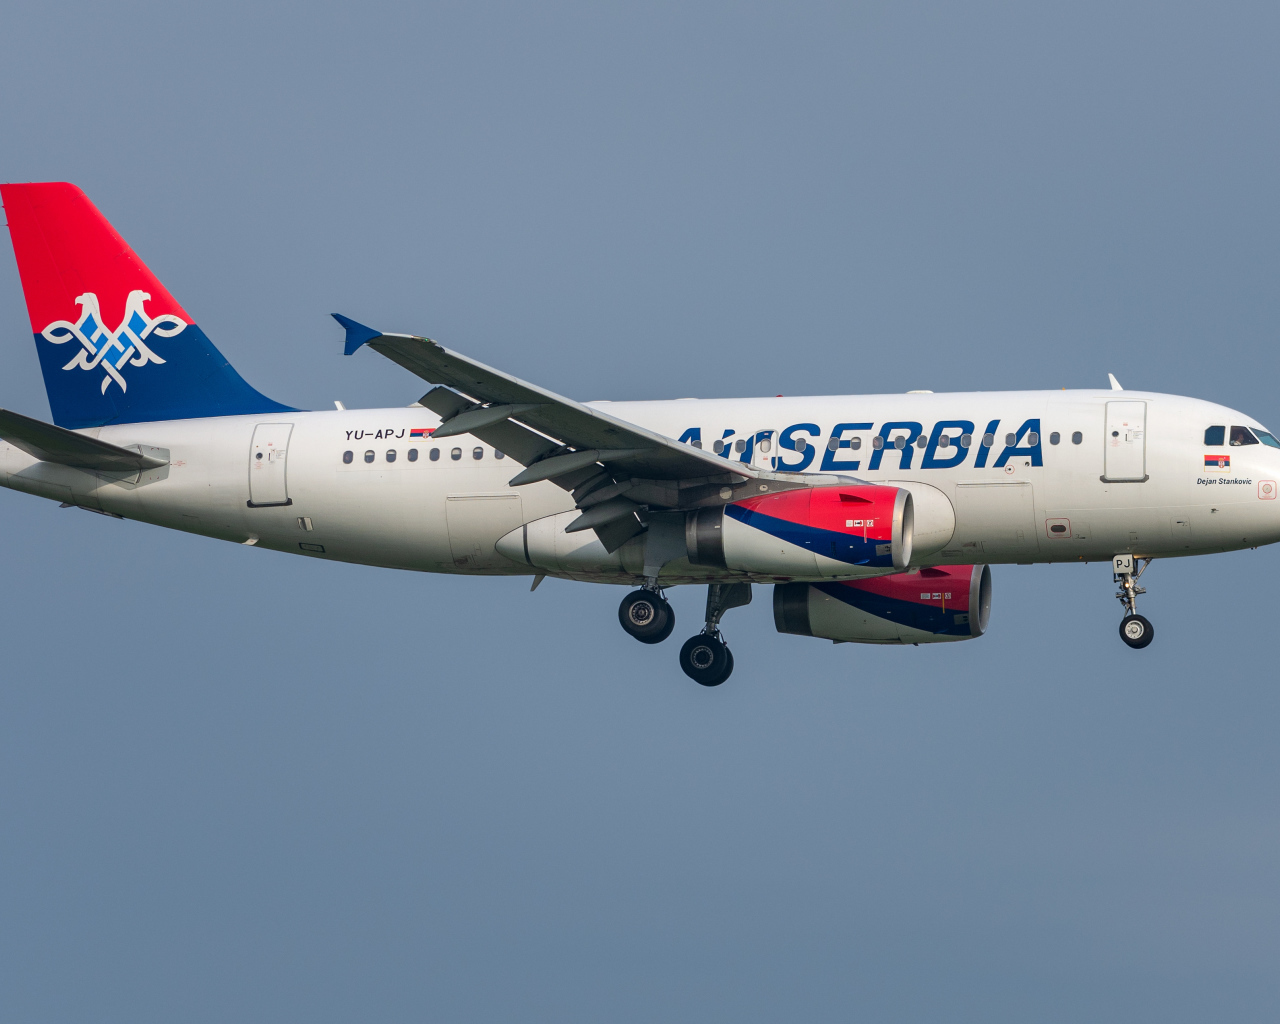 Large passenger Airbus A319-100, Air Serbia Airlines